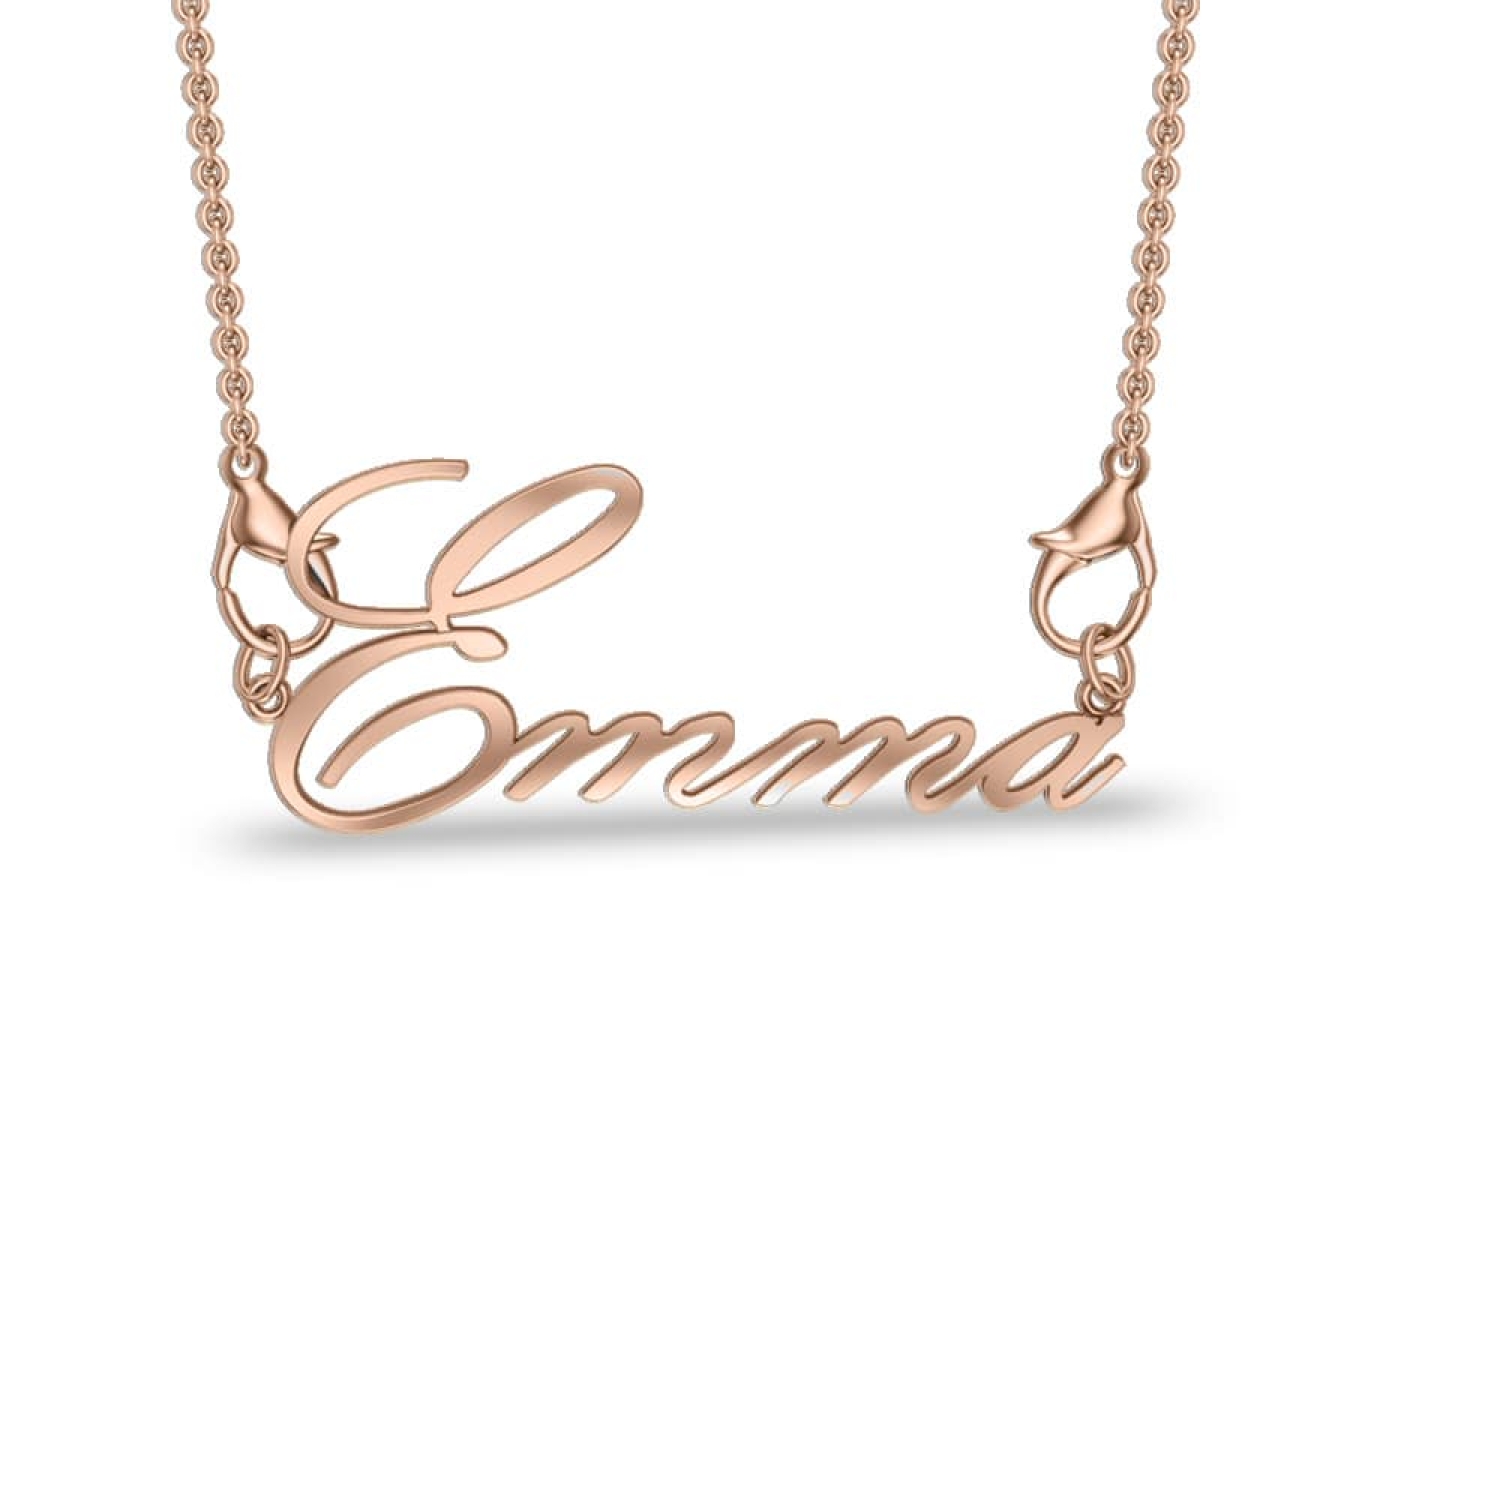 Gold Pendant Necklace - Mariam | Ana Luisa | Online Jewelry Store At Prices  You'll Love